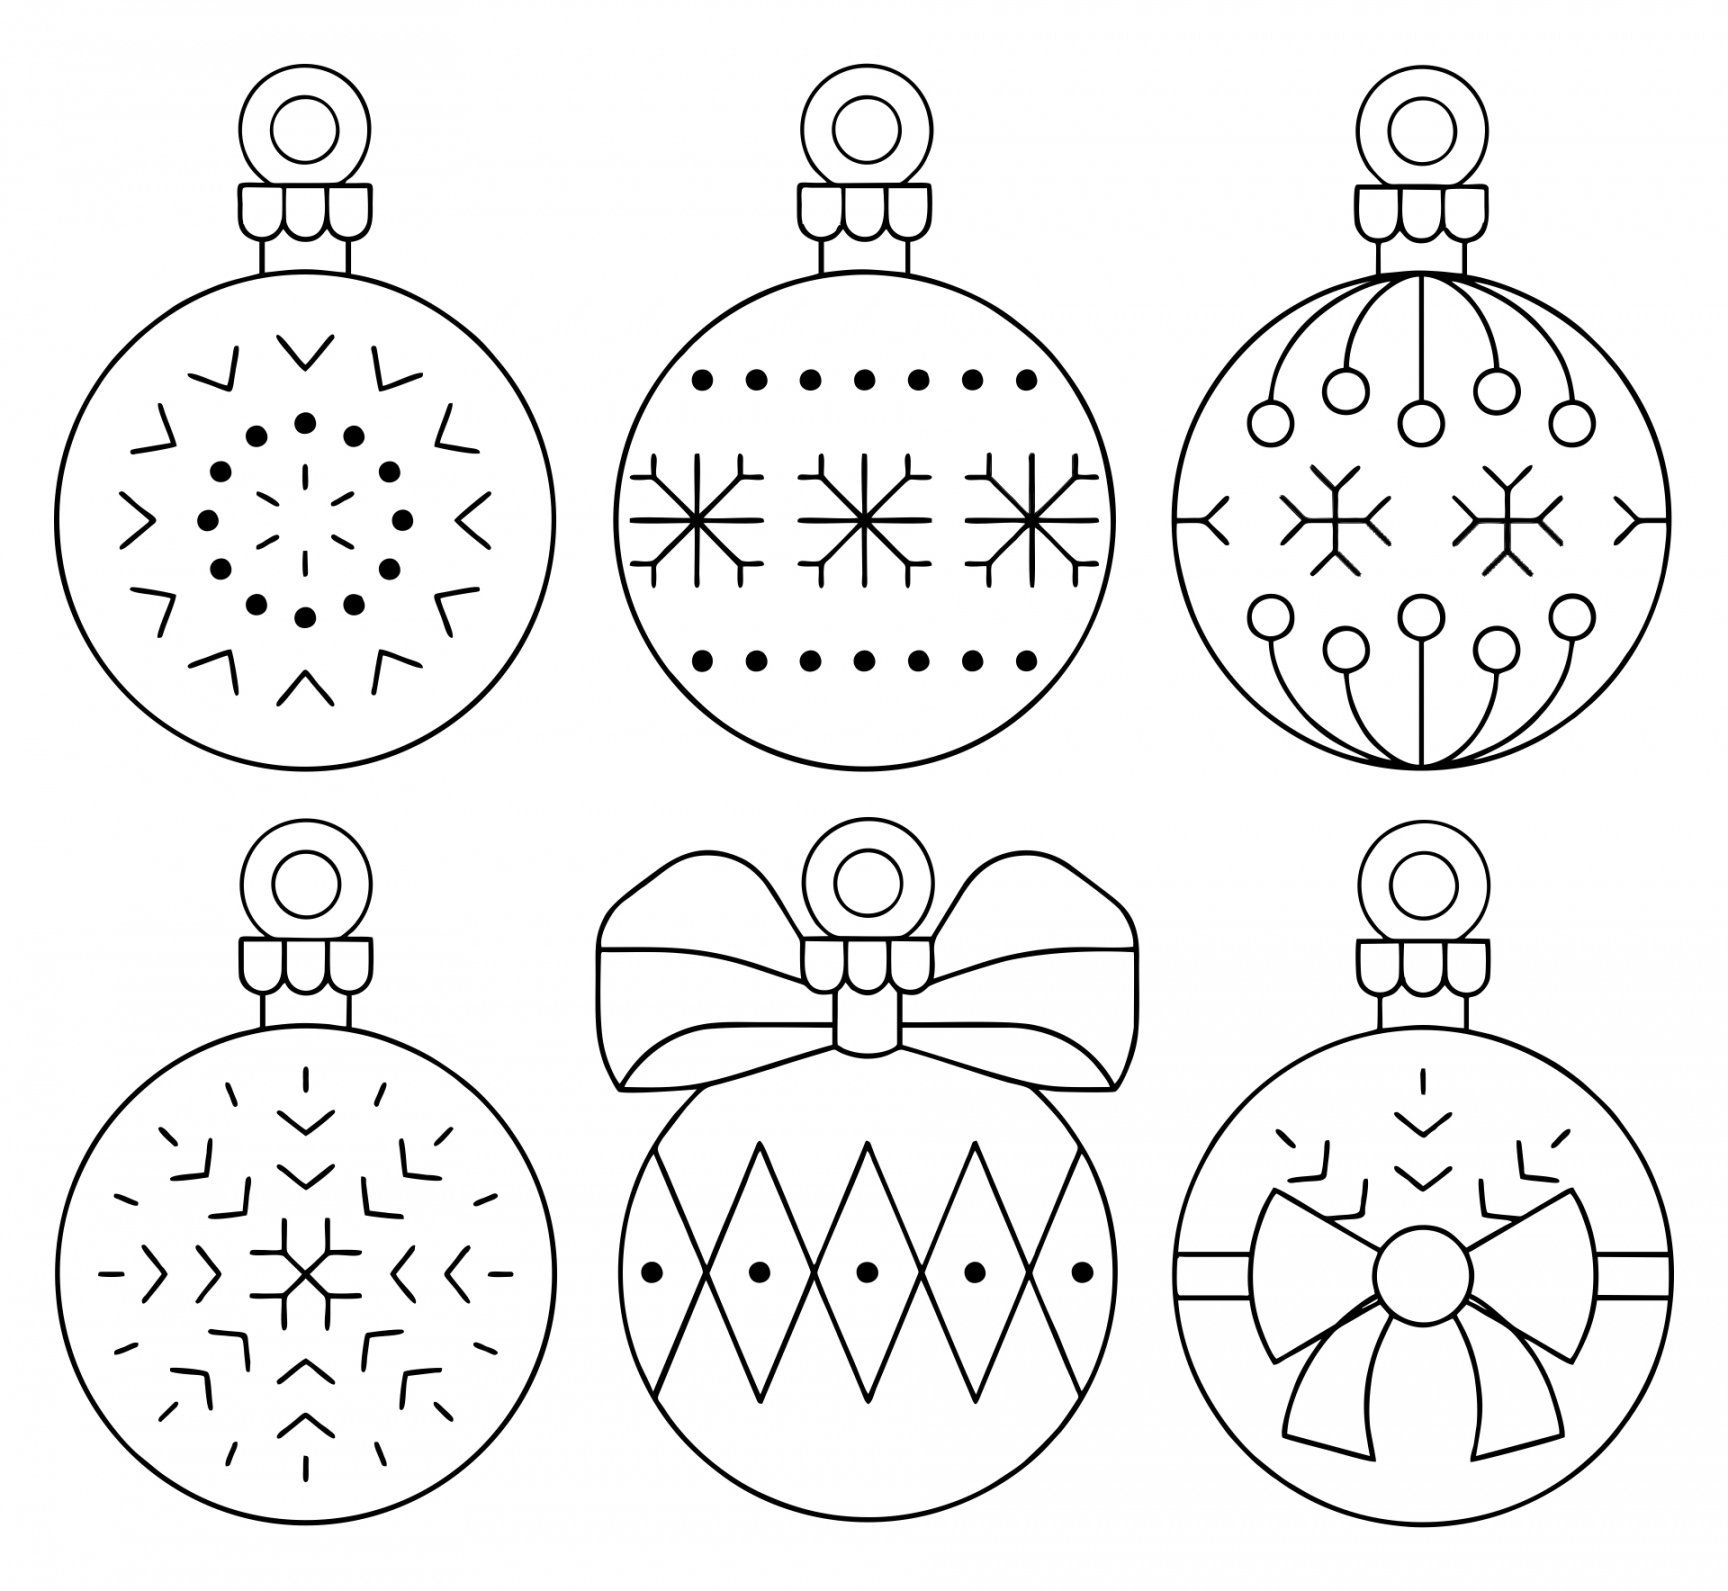 Printable Christmas Templates: Festive Designs For All Your Holiday ...